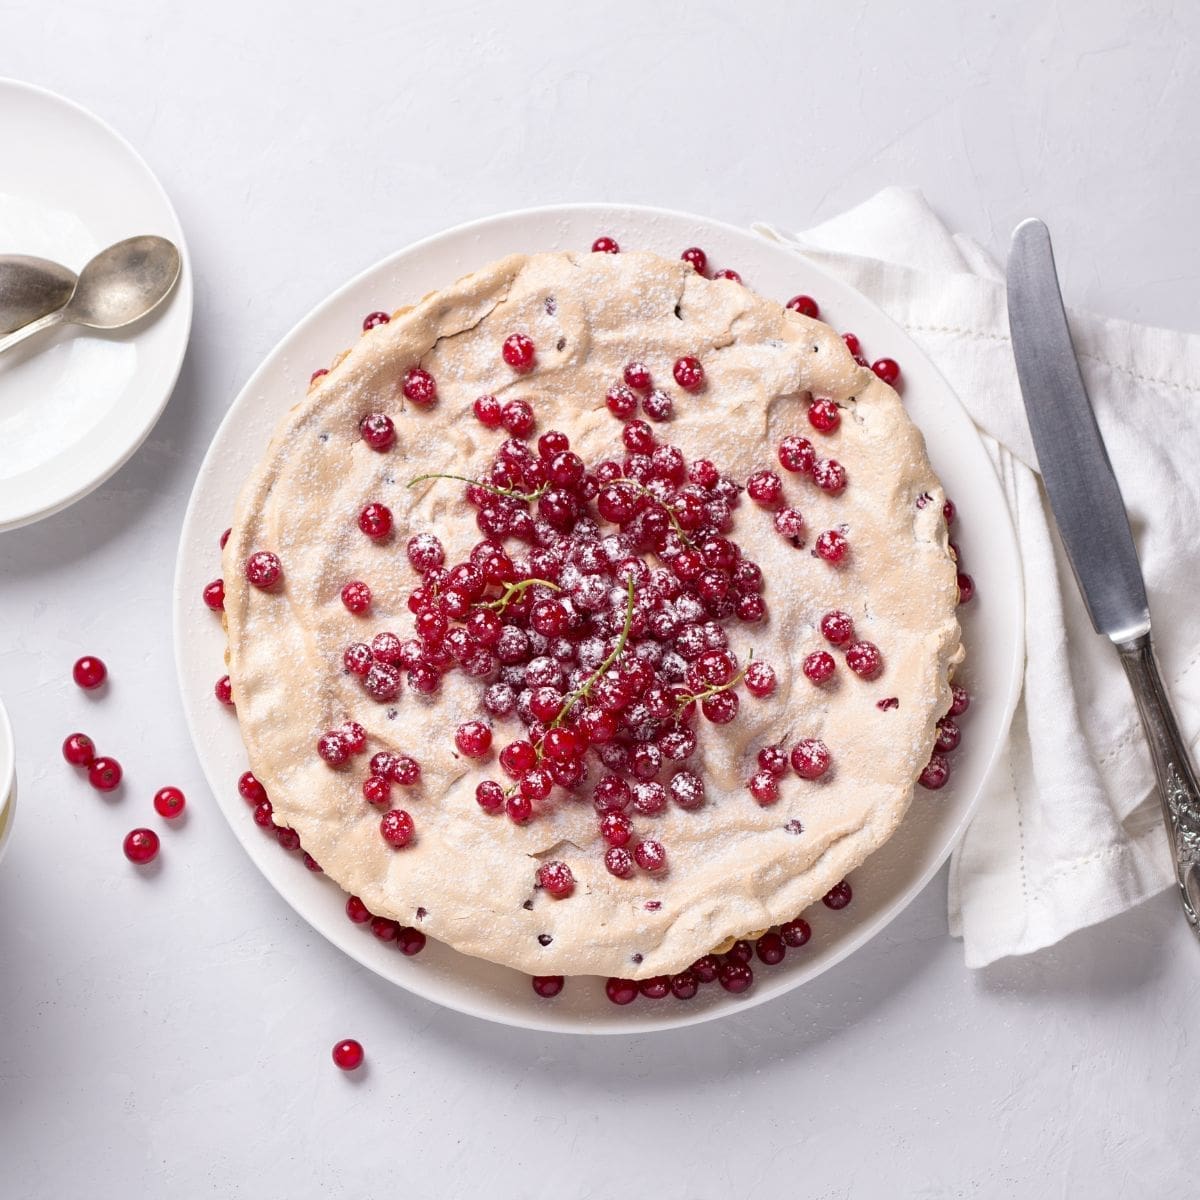 27 BEST Red Currant Recipes (Tasty Ways To Use Red Currants)